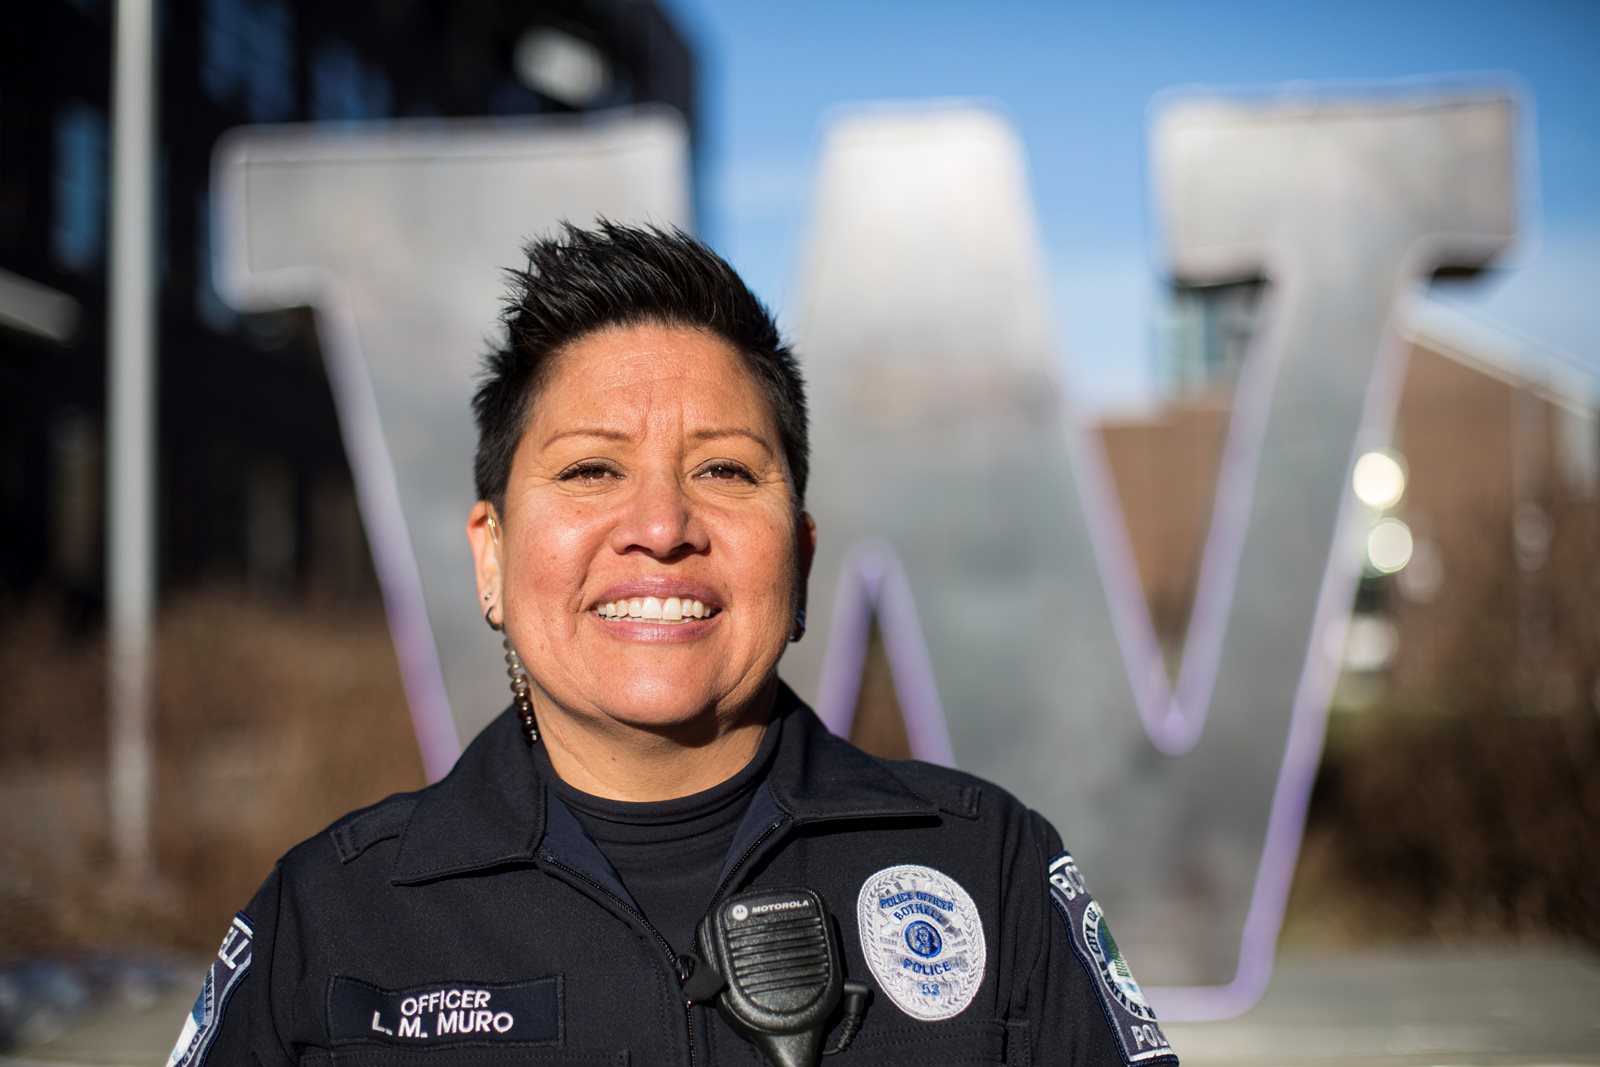 Bothell Police Officer Louise Muro